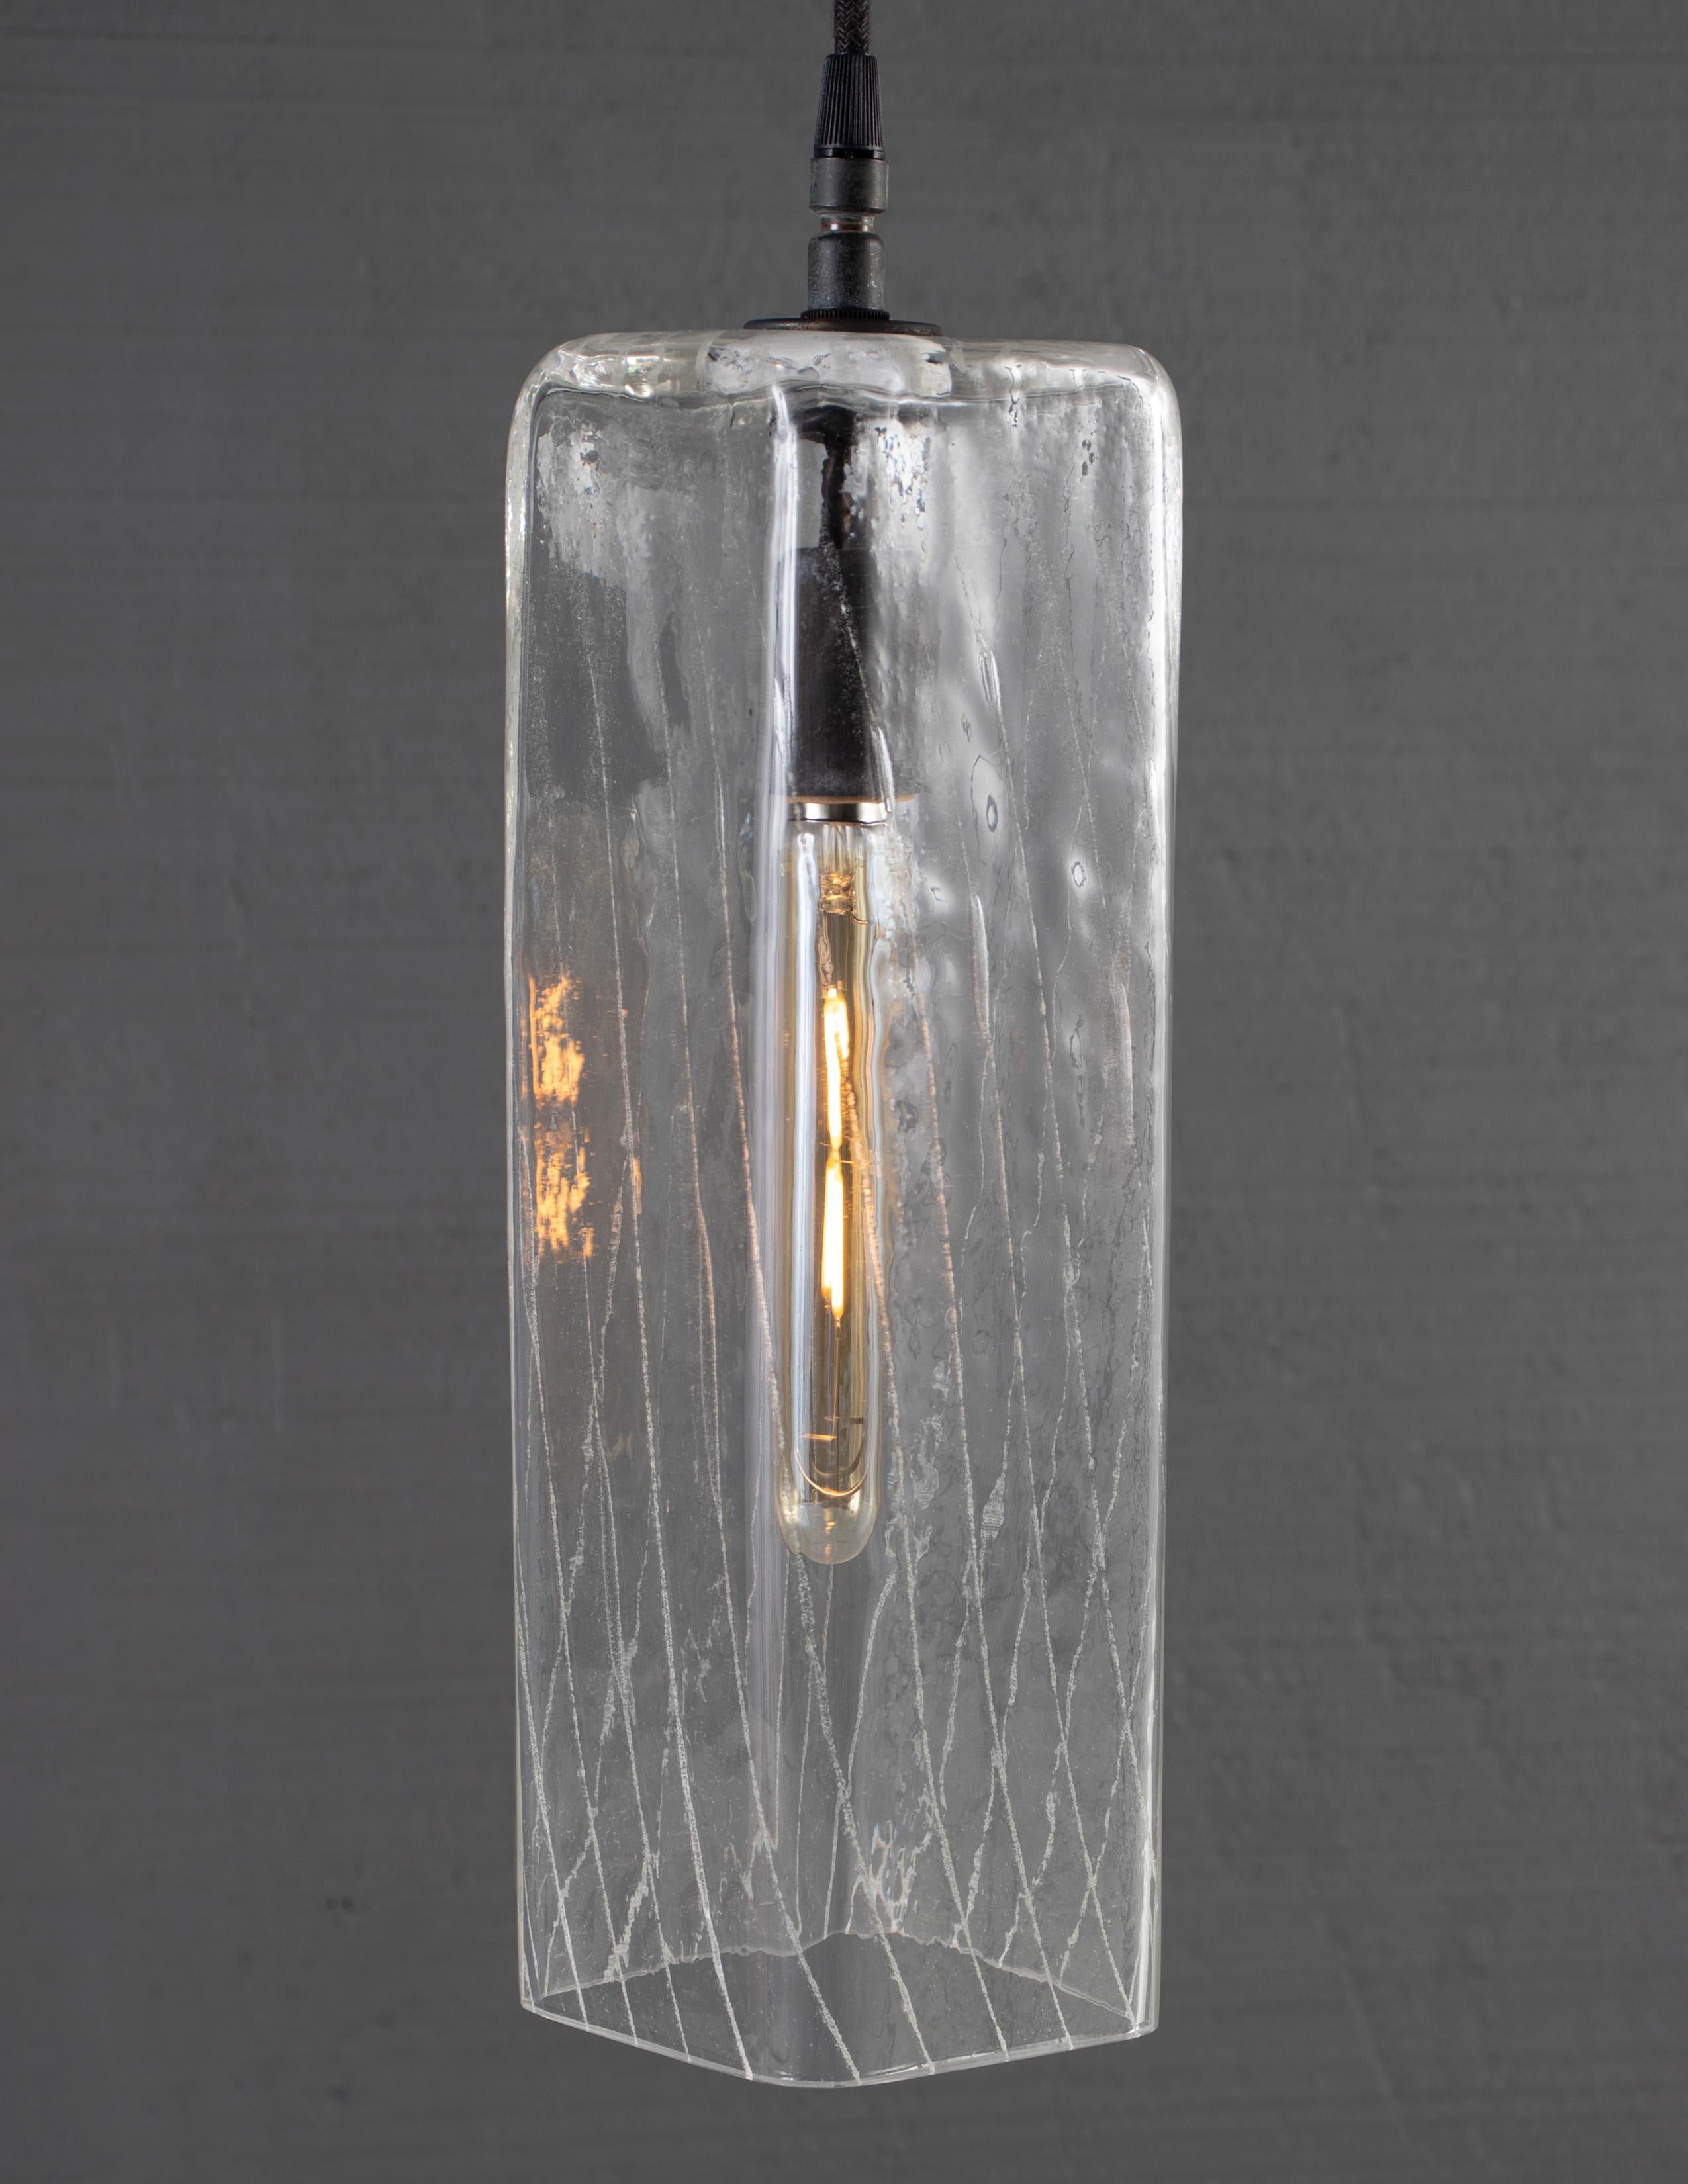 Mouth blown glass with Variegated Luminance

Bulb 1x medium base 30 watt incandescent

Handcrafted in Italy. Exclusive to Brendan Bass

Minimum hanging height: 12